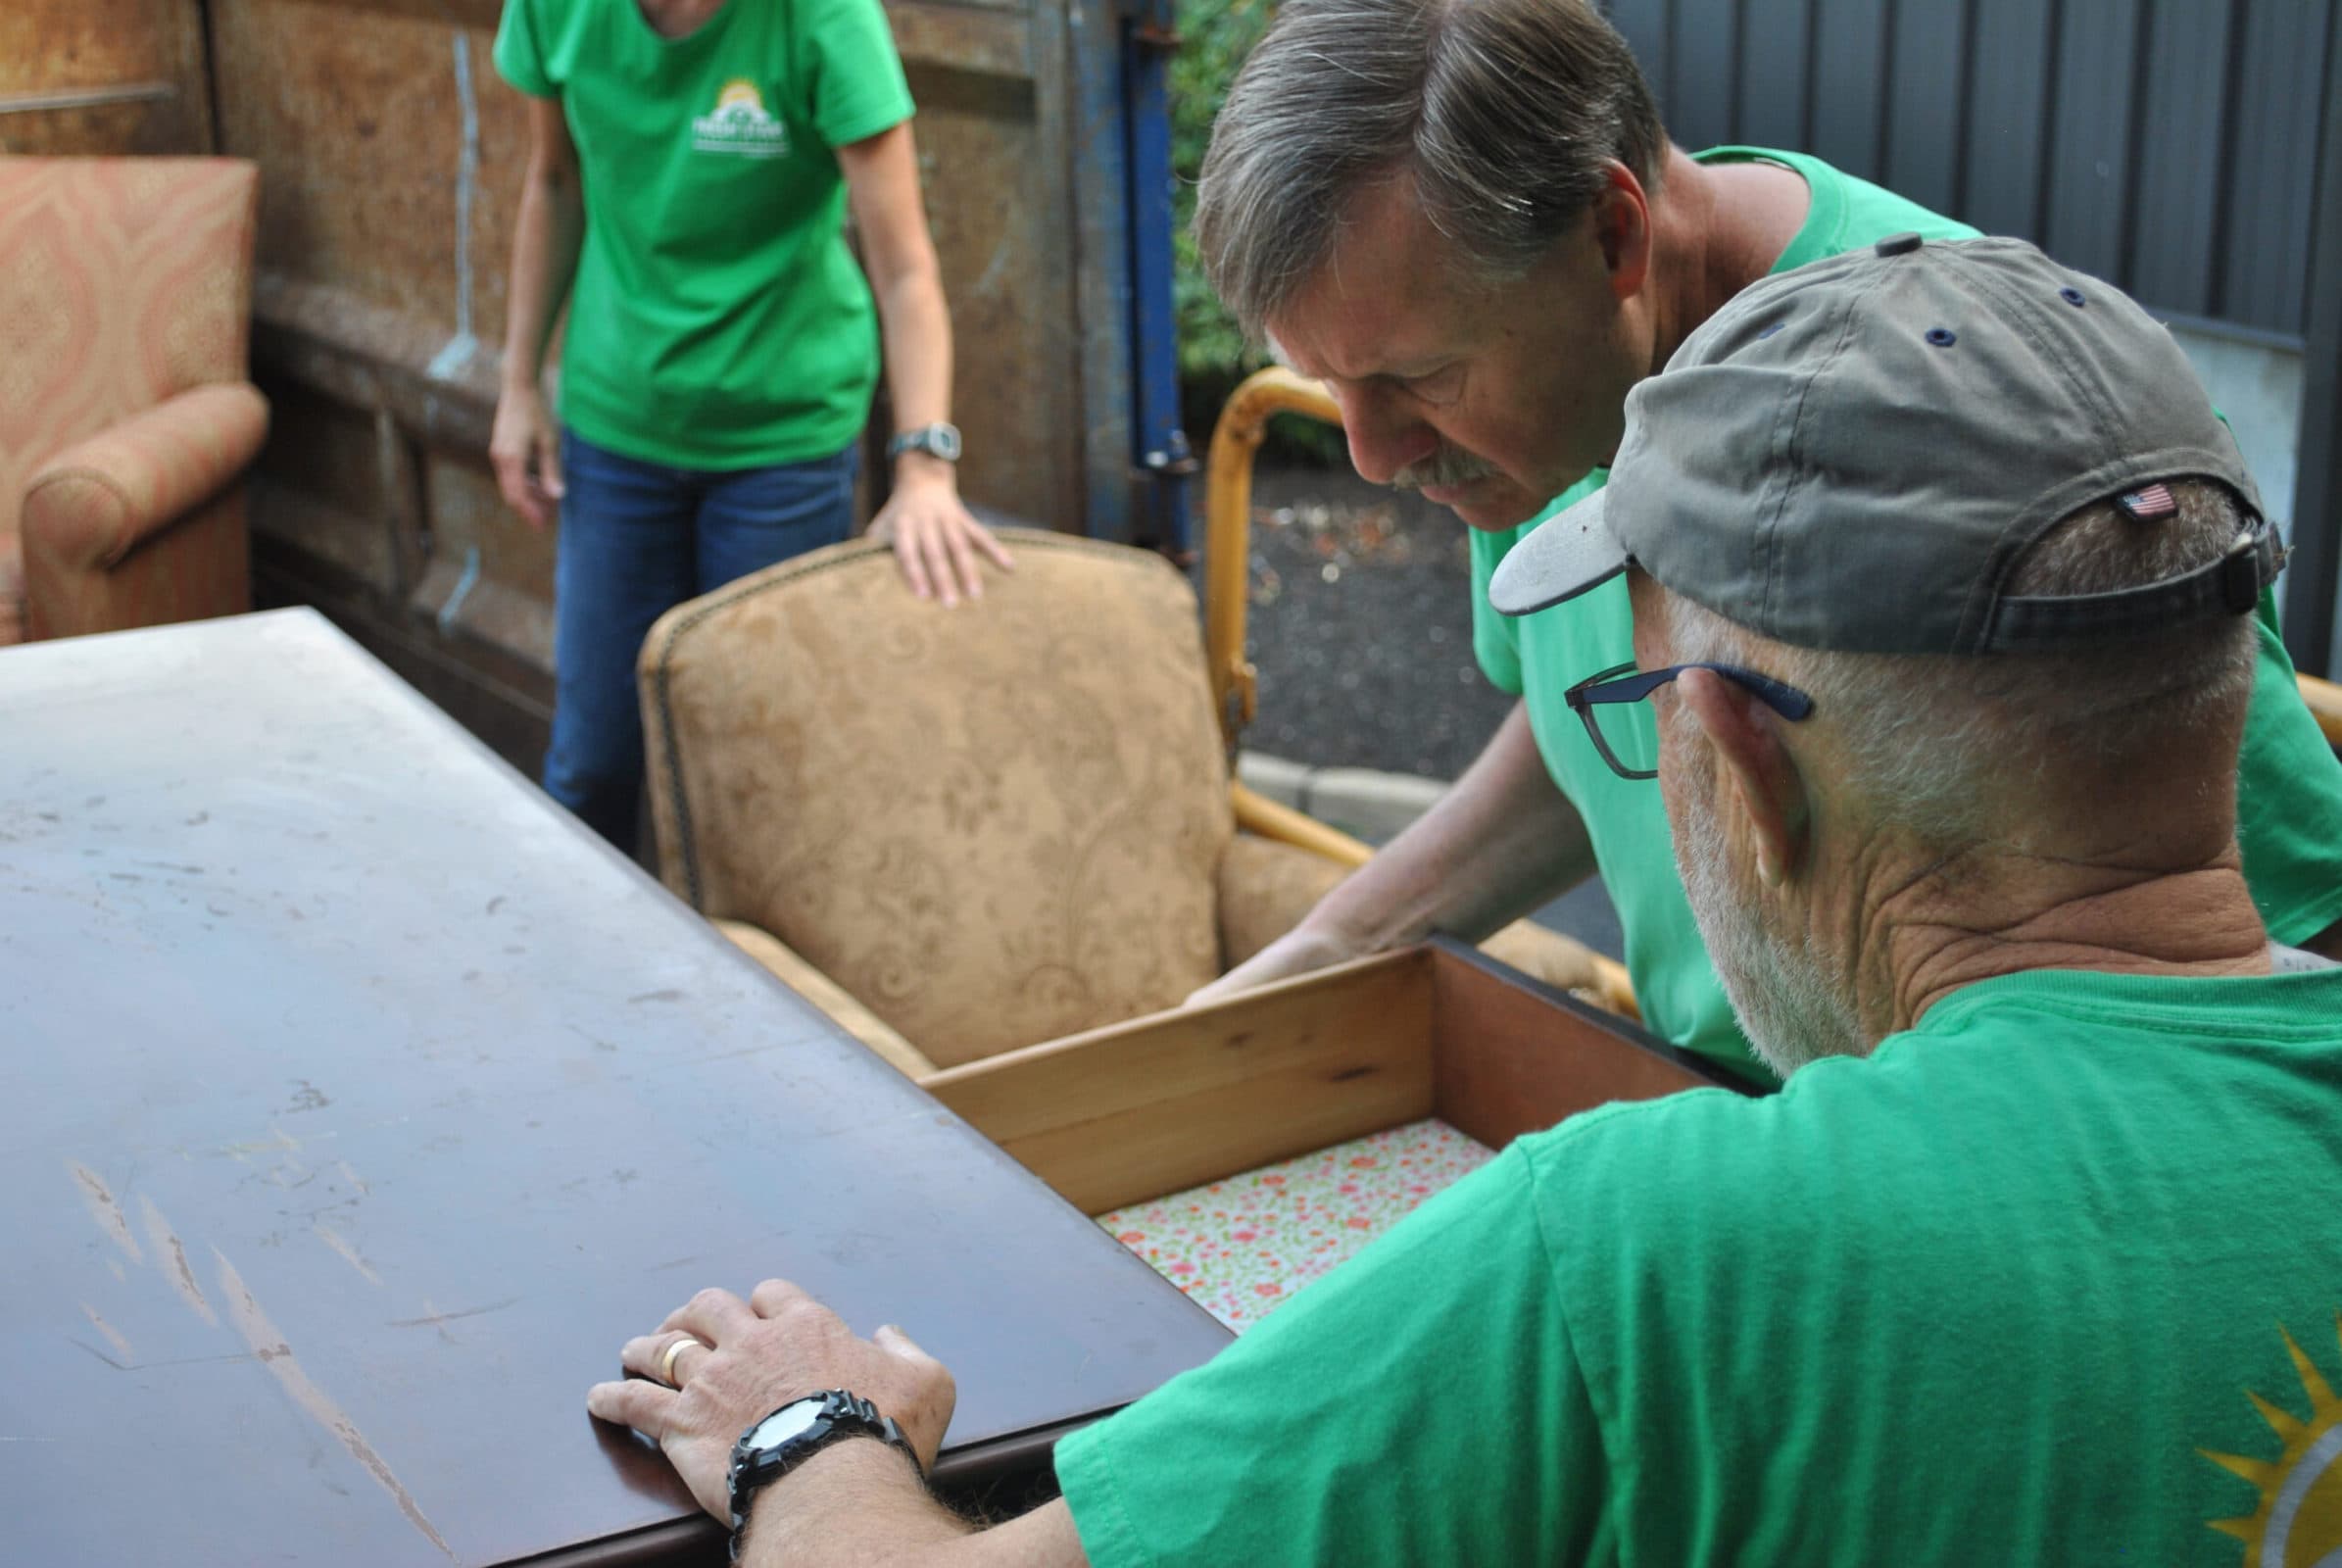 Fresh Start volunteers examine a piece of donated furniture.